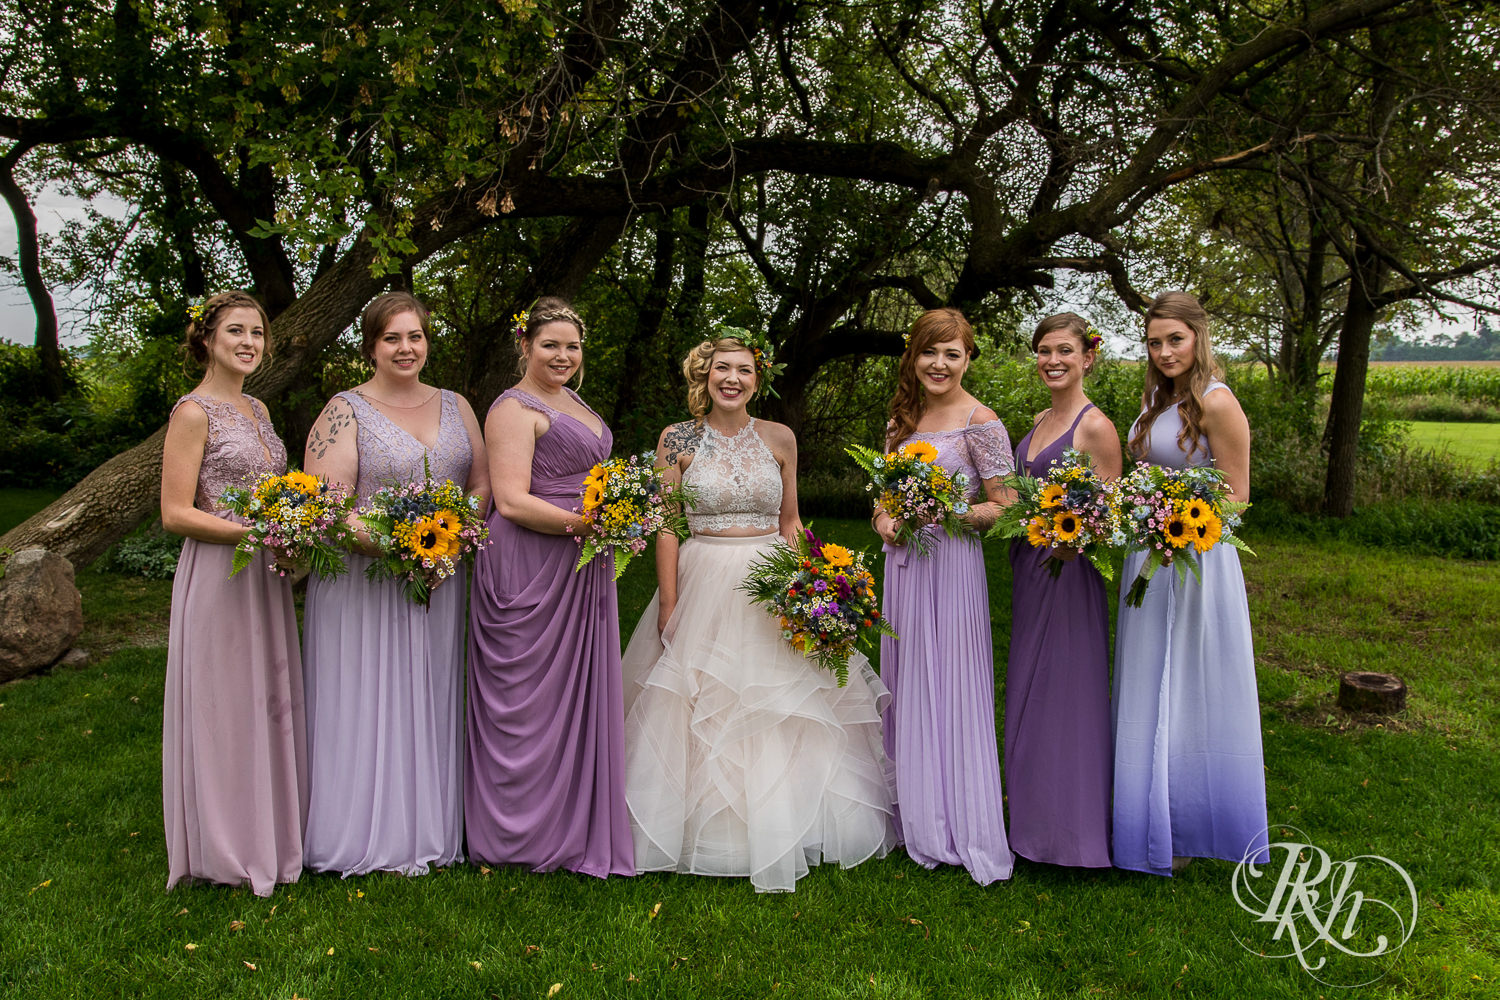 Bride smiles with wedding party before wedding at Coops Event Barn in Dodge Center, Minnesota.